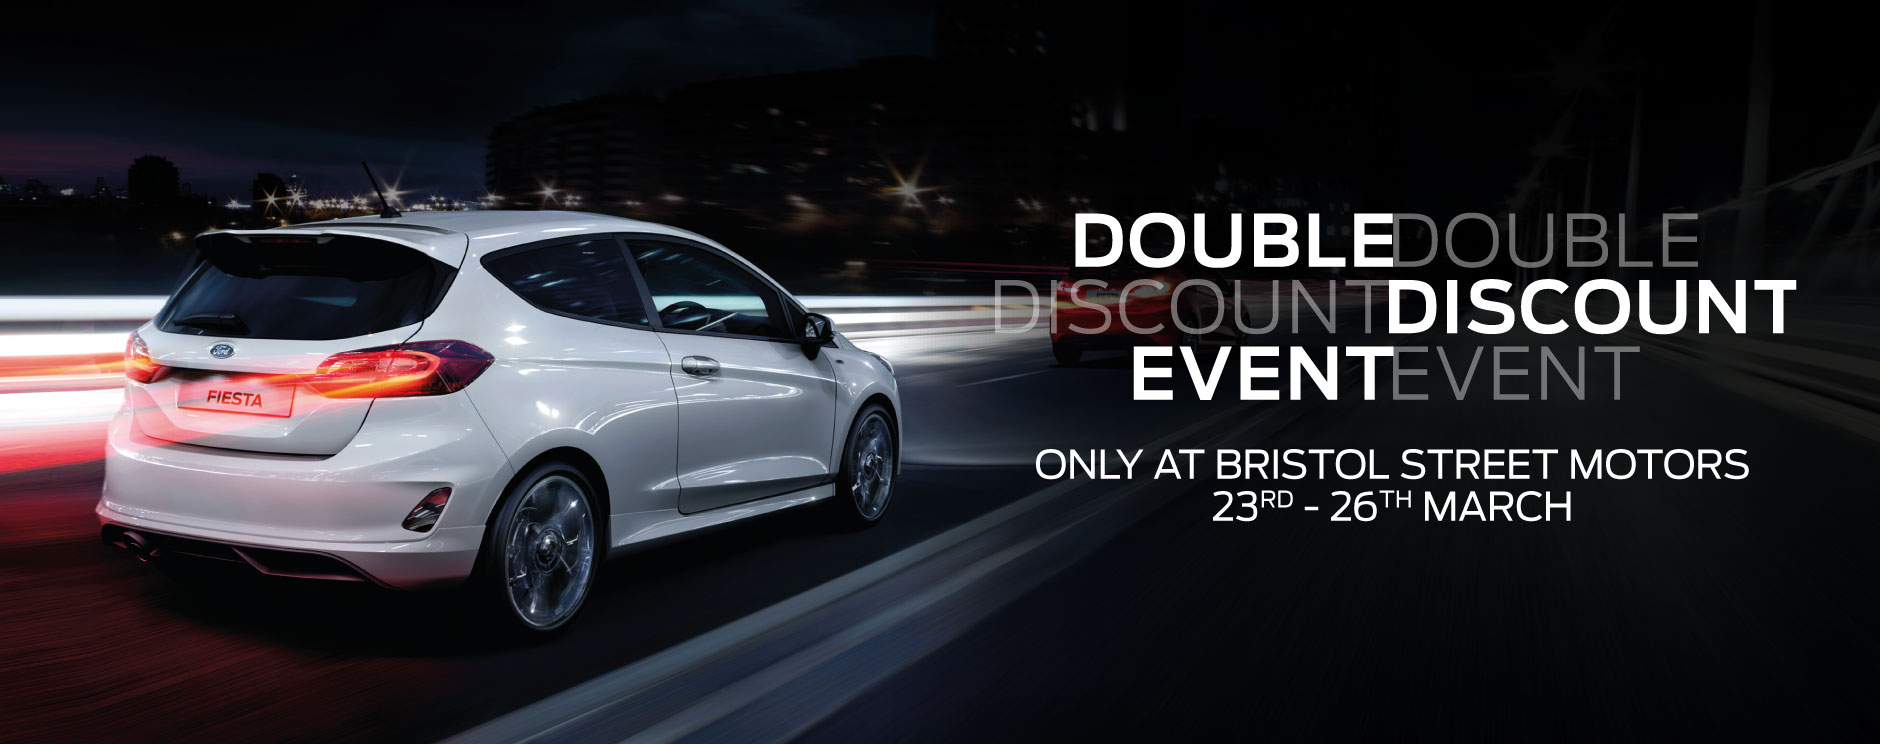 ford-double-discount-event-bristol-street-motors